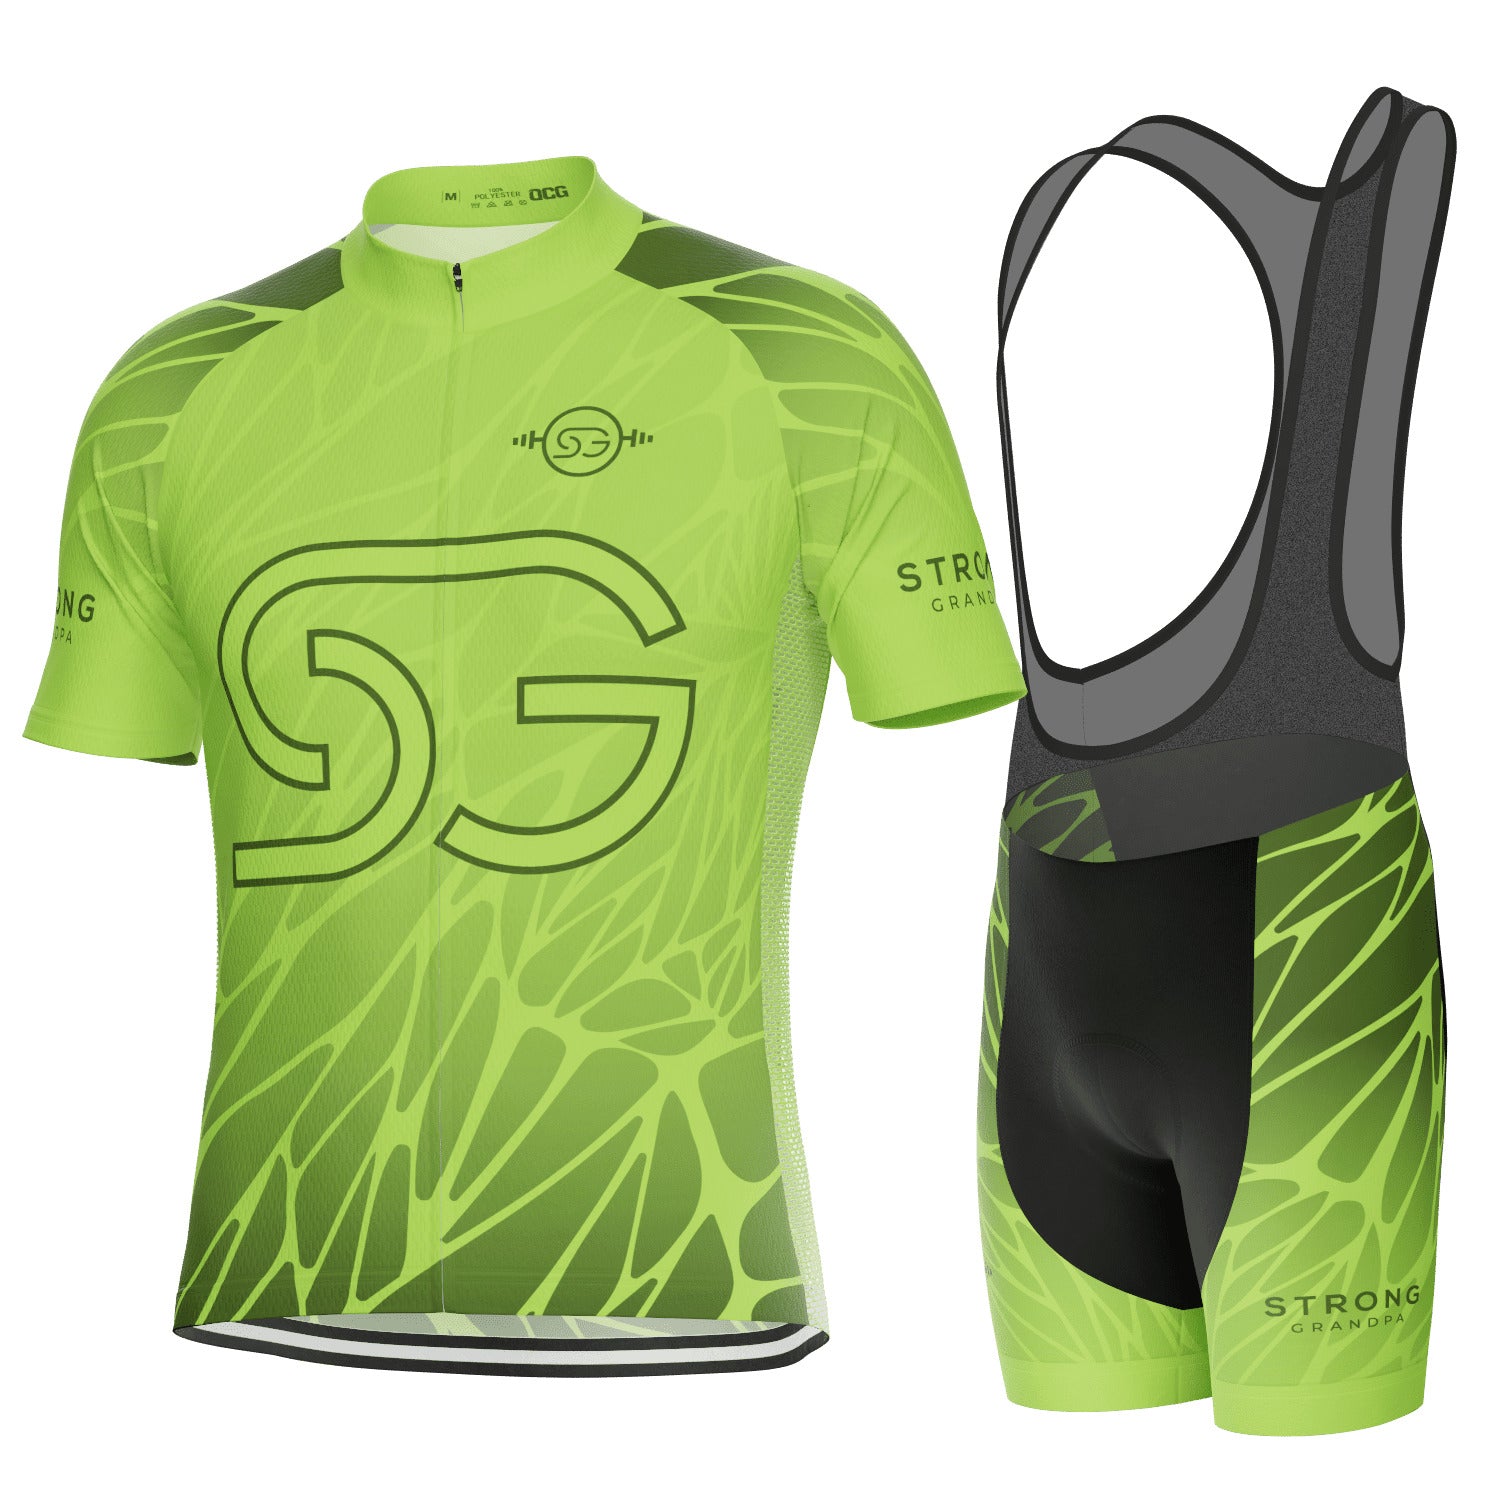 Men's SG - Live Your Best Life 2 Piece Cycling Kit